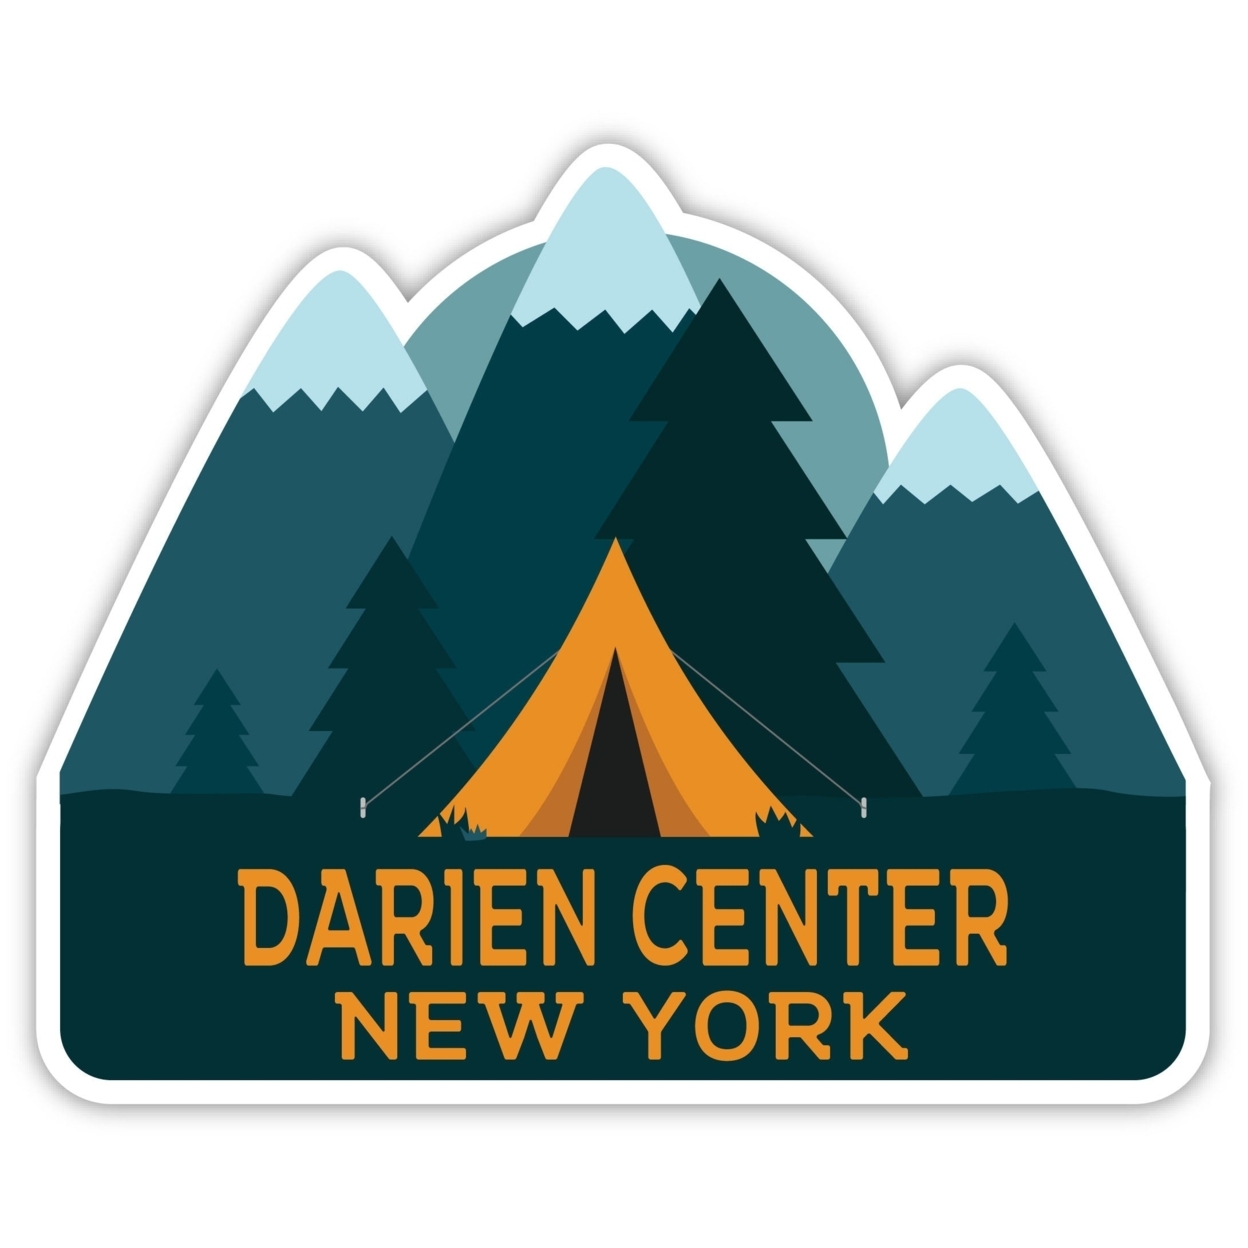 Darien Center New York Souvenir Decorative Stickers (Choose Theme And Size) - 4-Pack, 2-Inch, Bear